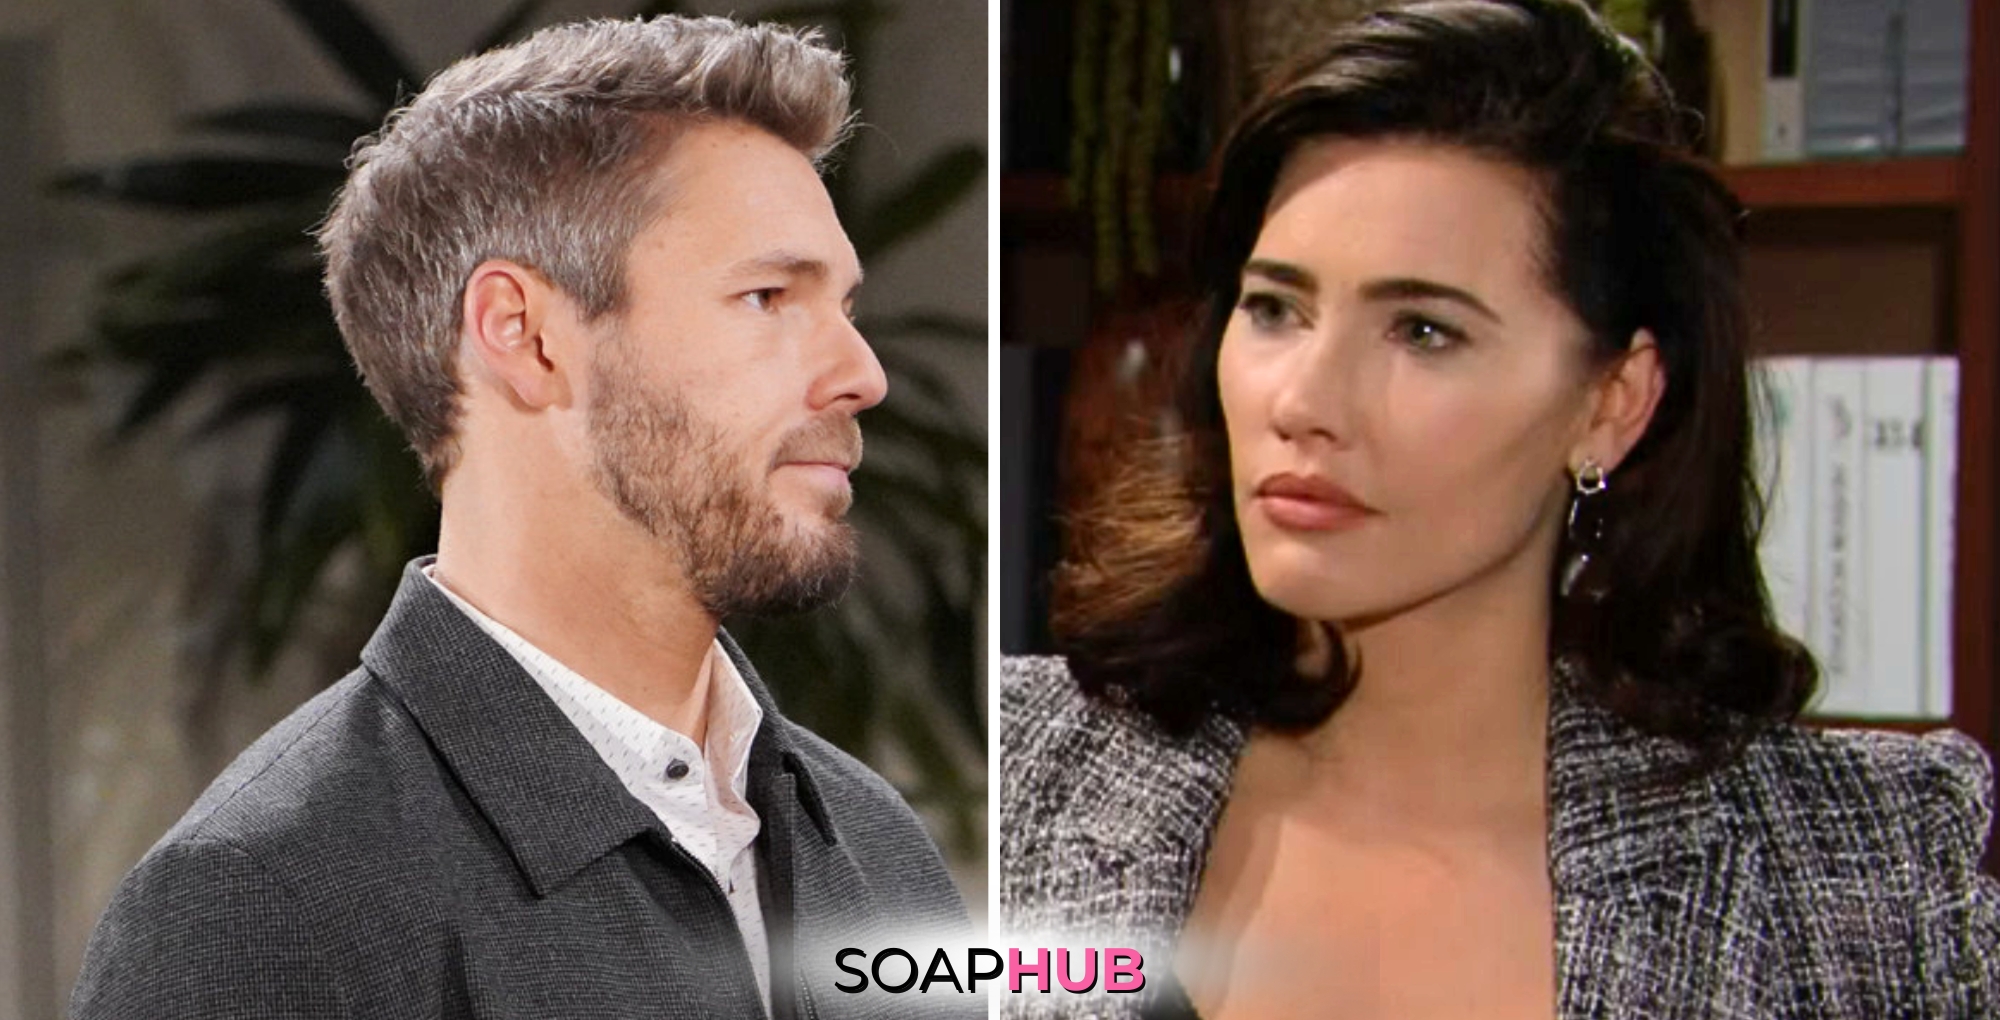 Bold and the Beautiful Spoilers for Monday, April 22, Episode 9255 Feature Liam and Steffy with the Soap Hub Logo Across the Bottom.